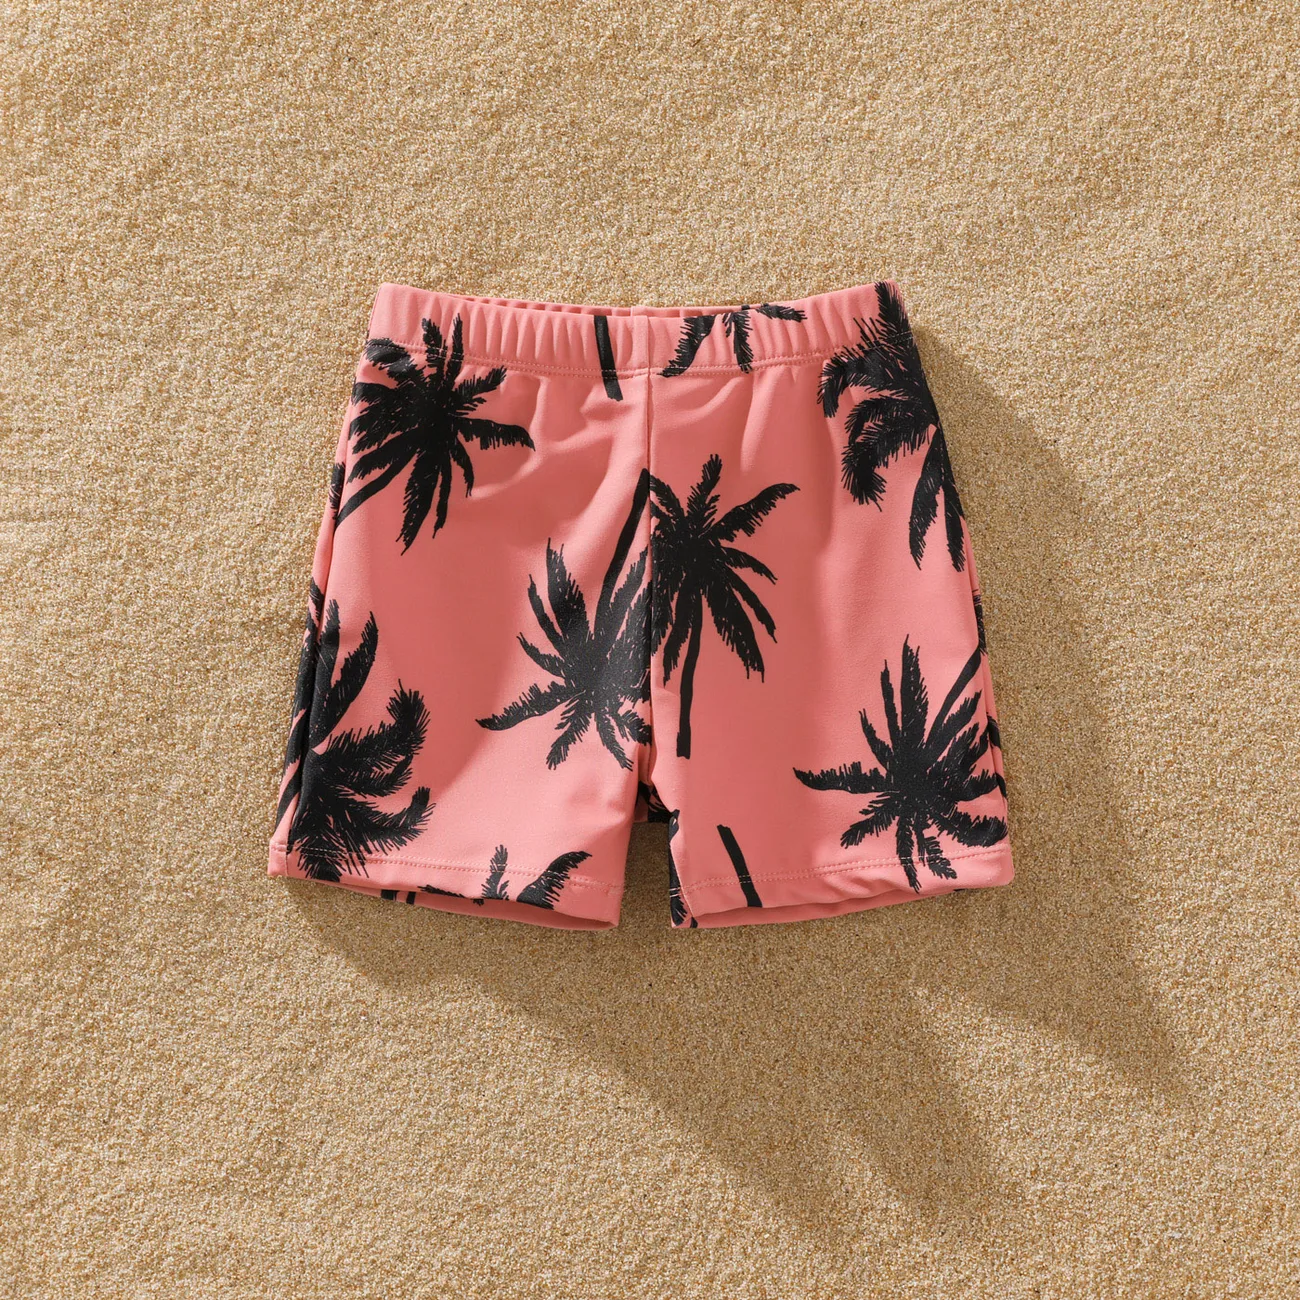 Family Matching All Over Coconut Tree Print Pink Swim Trunks Shorts and Spaghetti Strap One-Piece Swimsuit Mauve Pink big image 1